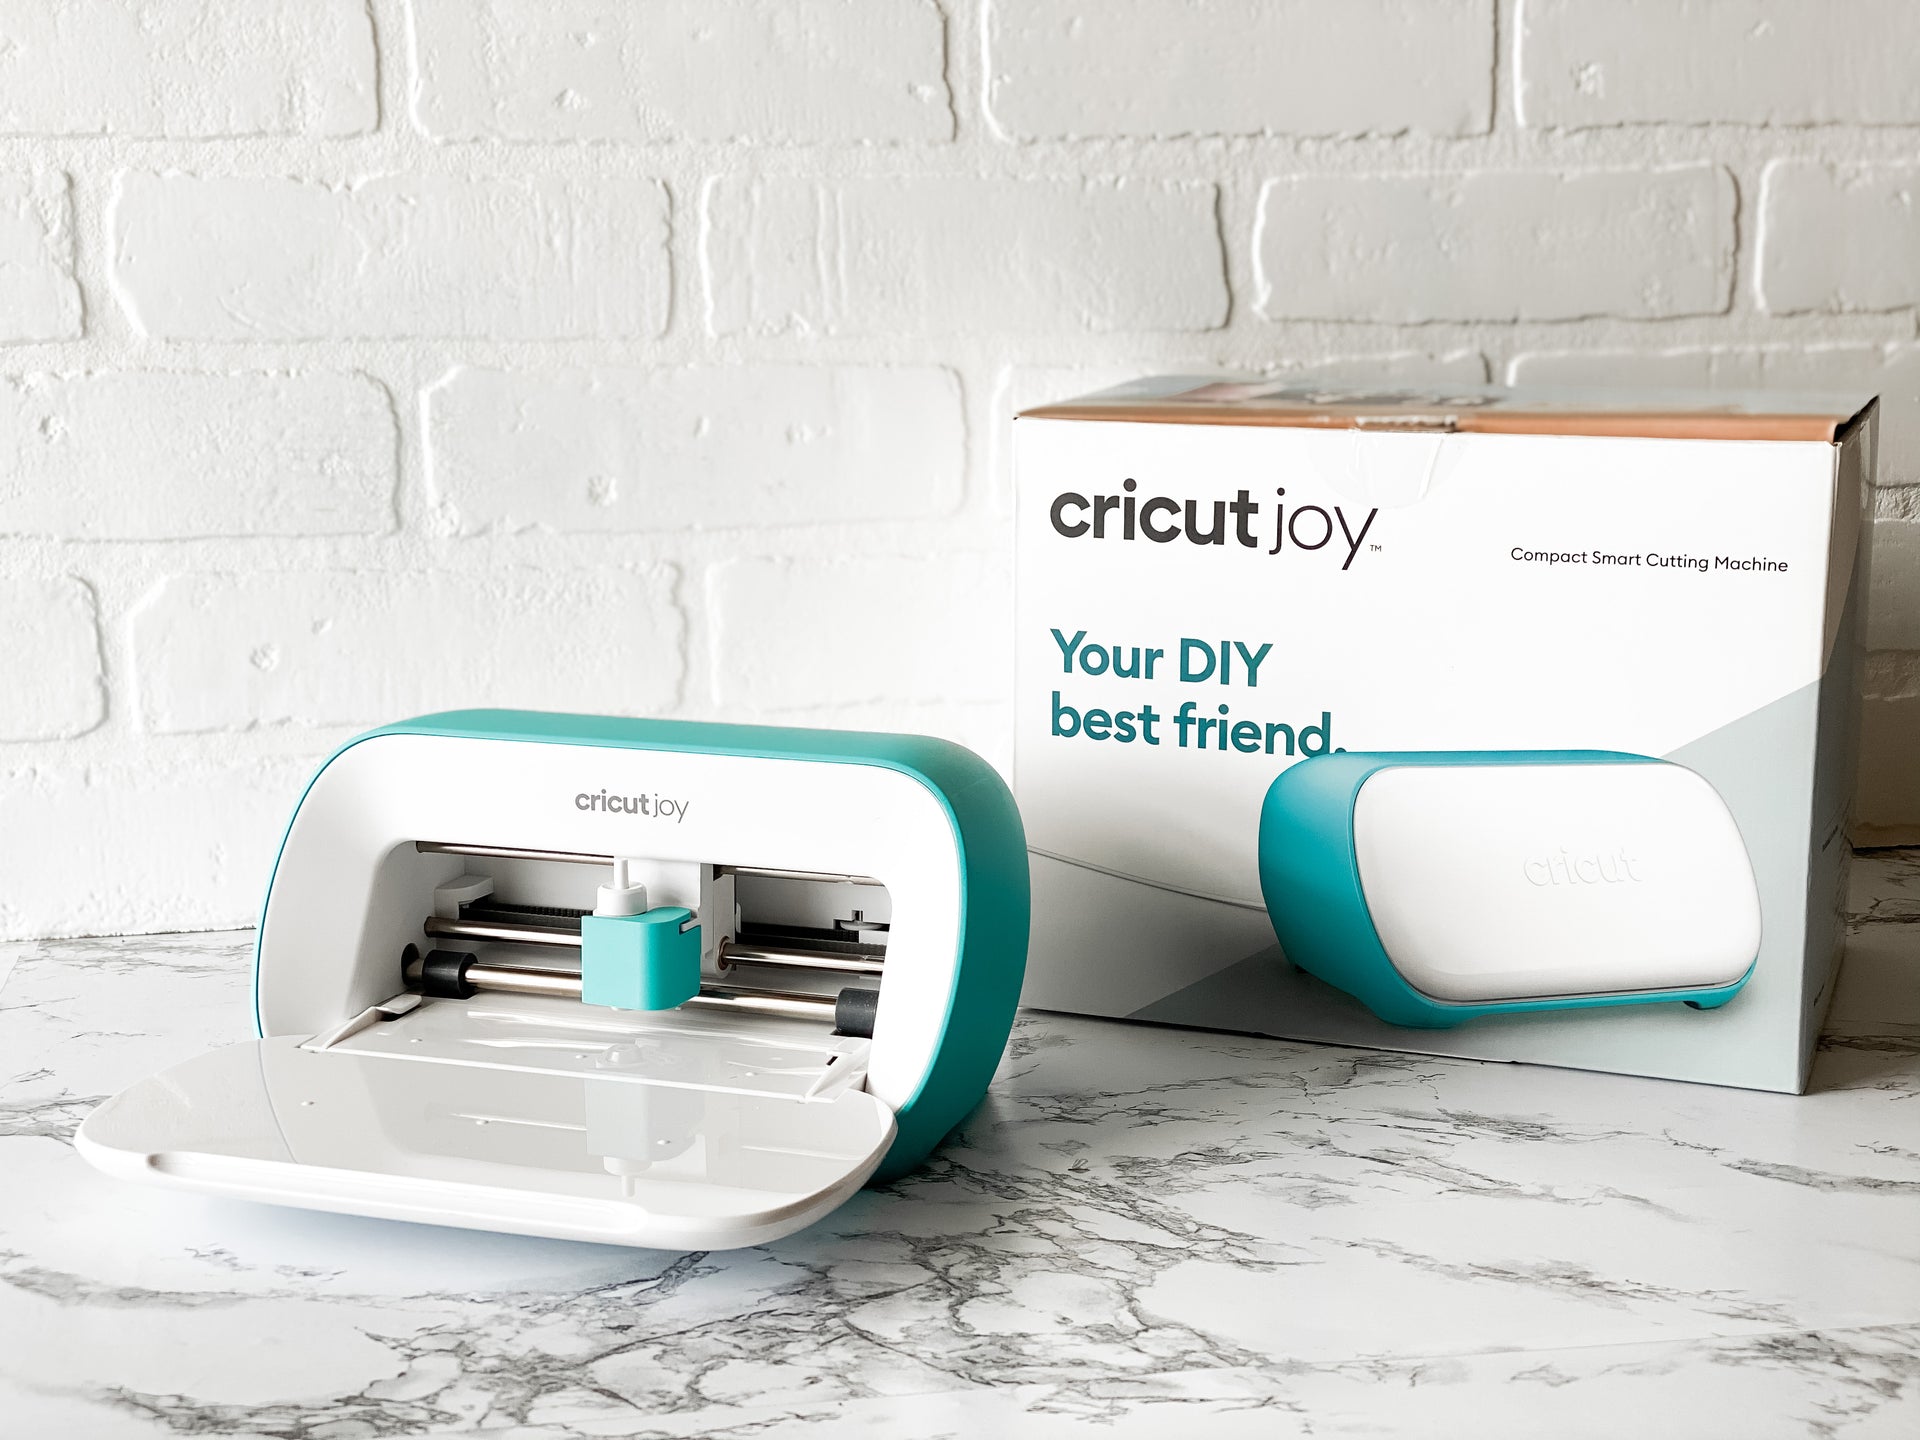 Getting Started with Cricut Joy